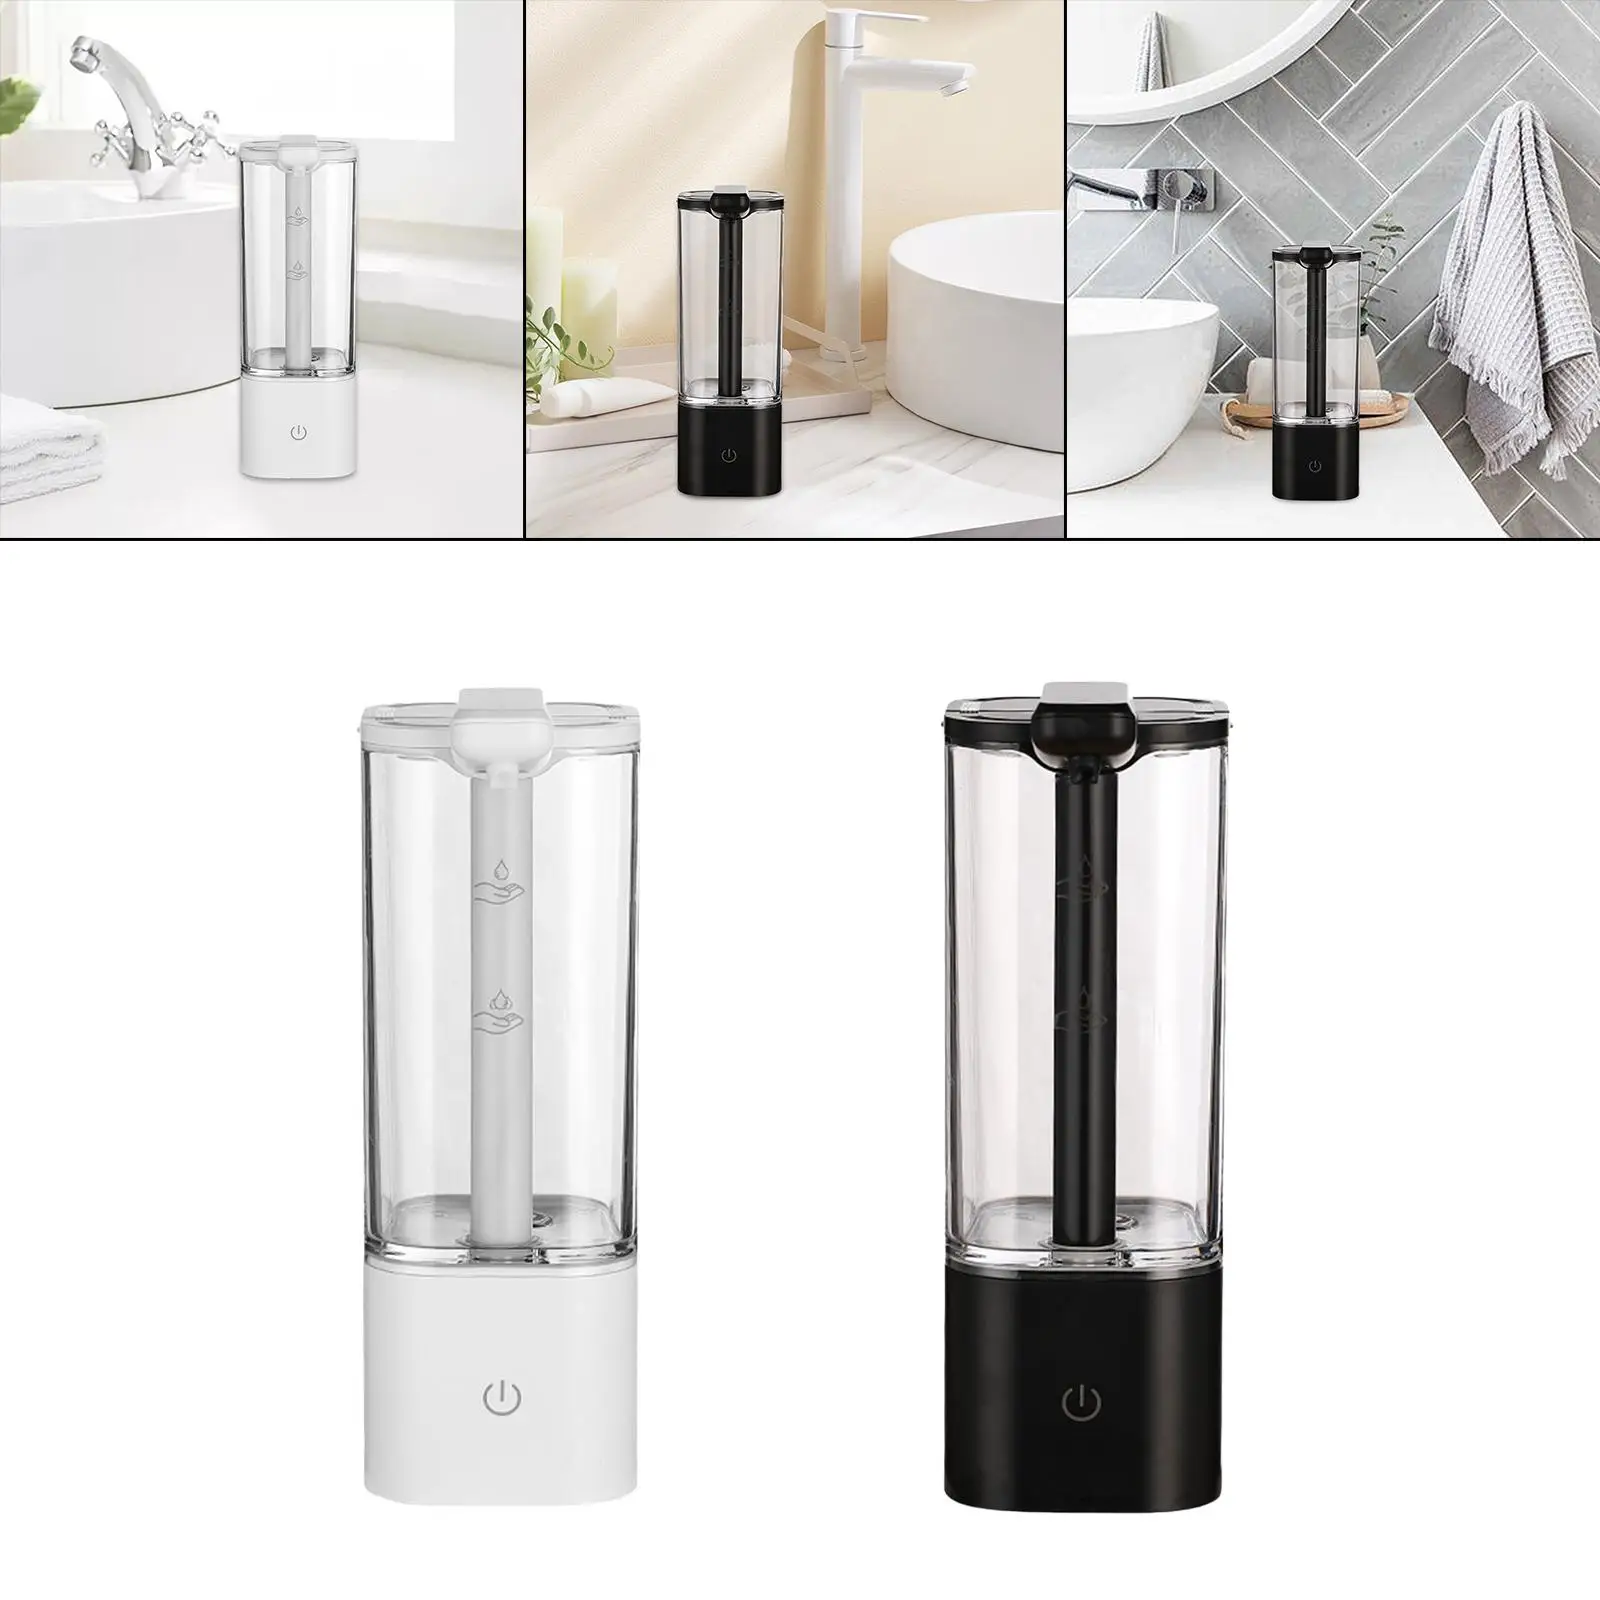 Soap Pump Dish Soap Dispenser 500ml Automatic Soap Dispenser Automatic Liquid Soap Dispenser for Commercial or Household Use